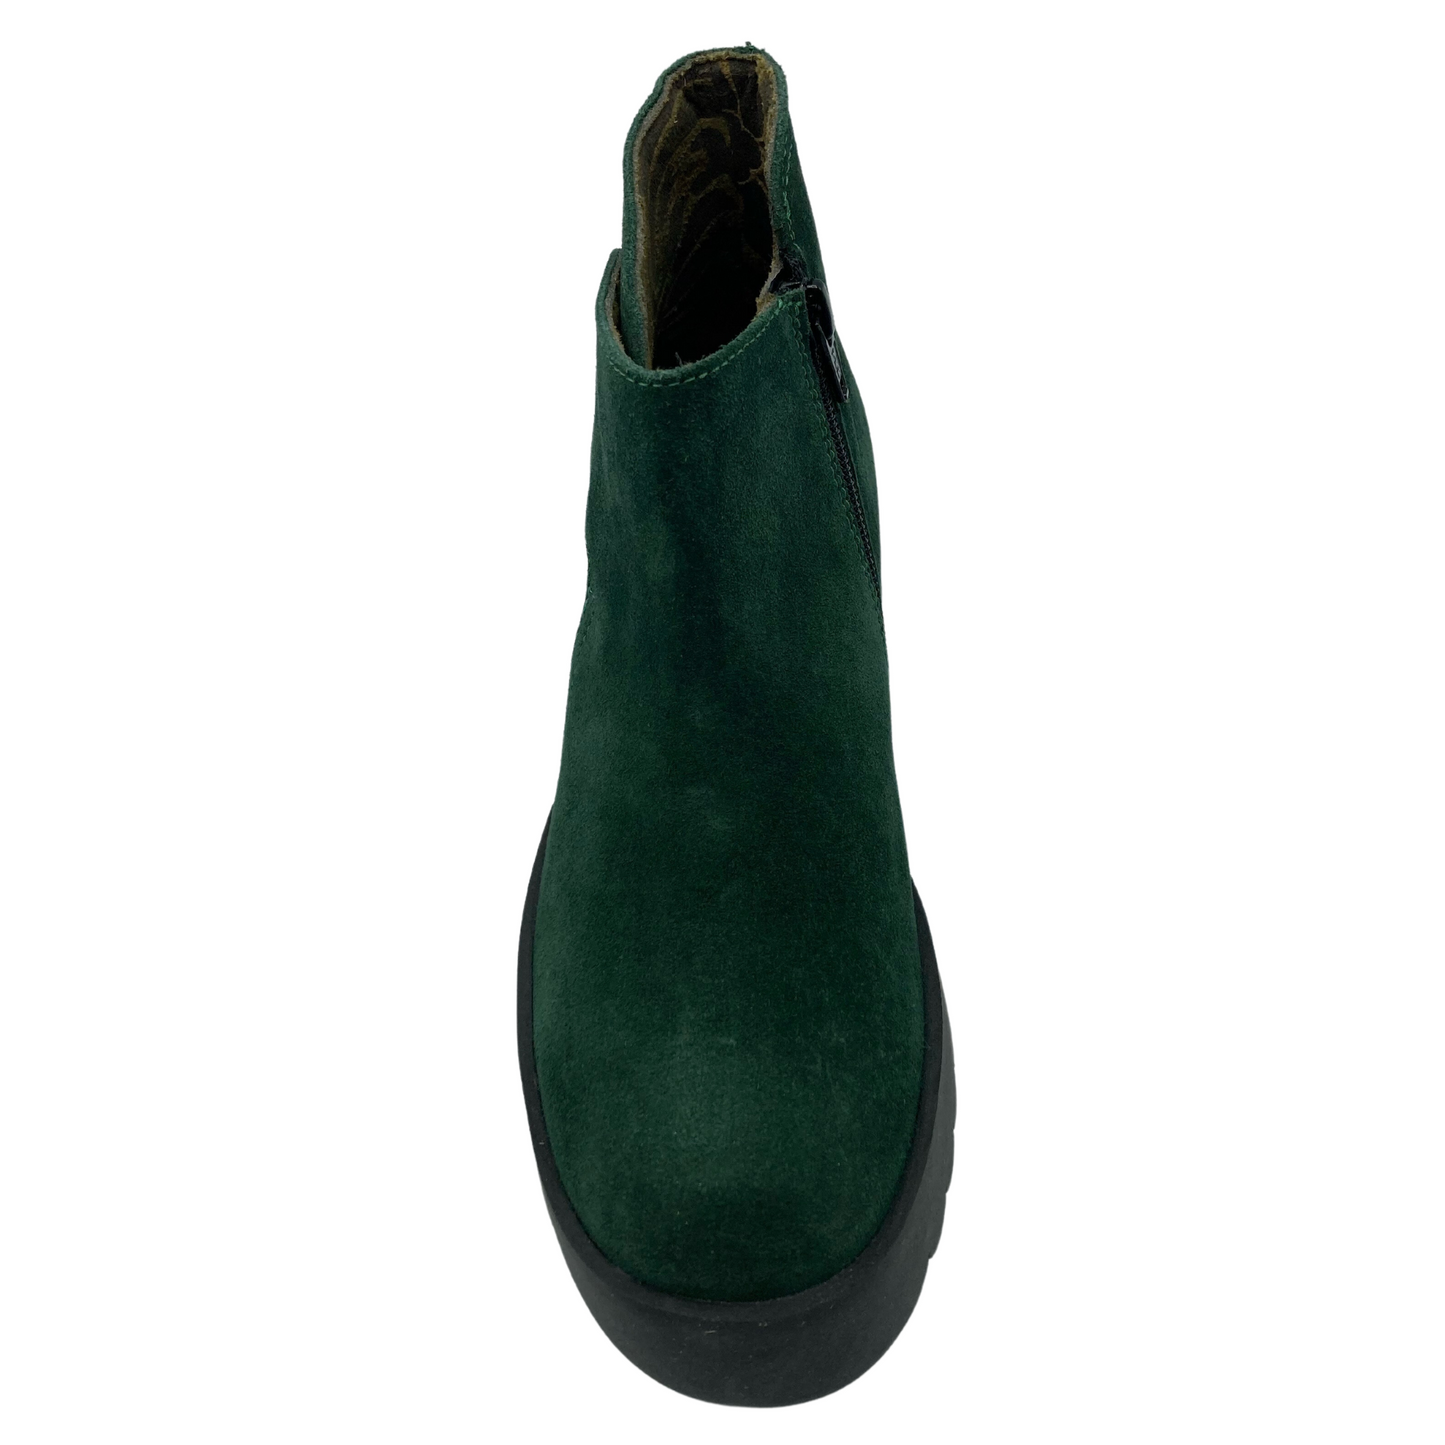 Top view of green suede ankle boot with textile lining and rounded toe